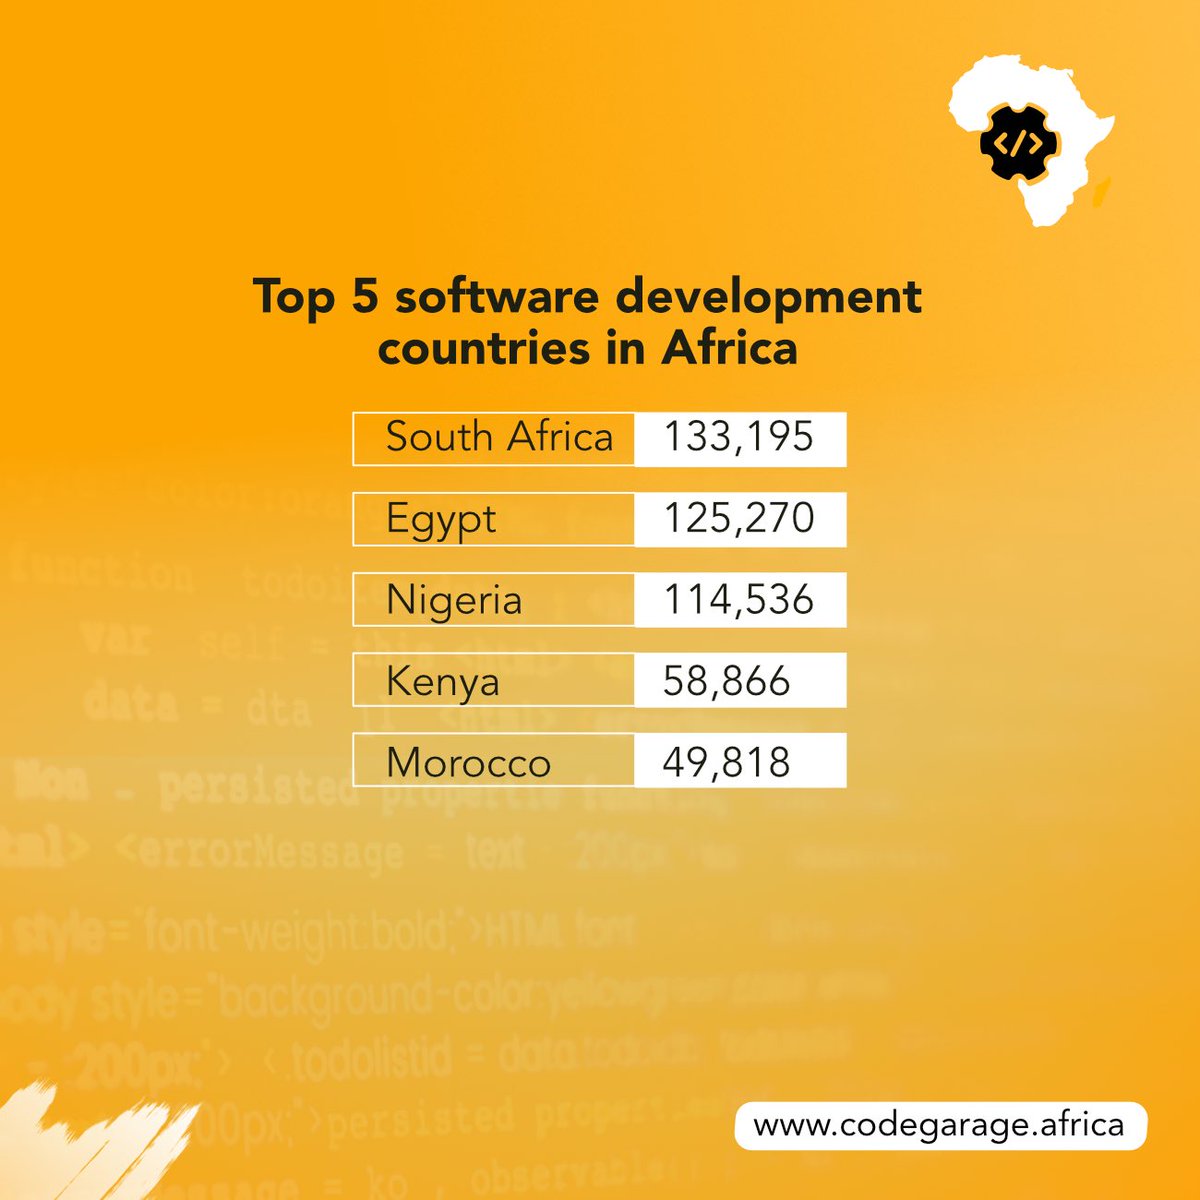 See👇🏽 where tech is happening in Africa. From the statistics displayed, you can see that Nigeria is an awakening giant!

Join the tech train by registering for a tech skill training with us now! - bit.ly/3Px1vFQ 

#CodeGarageAfrica #MondayMotivation #1000LinesOfCode